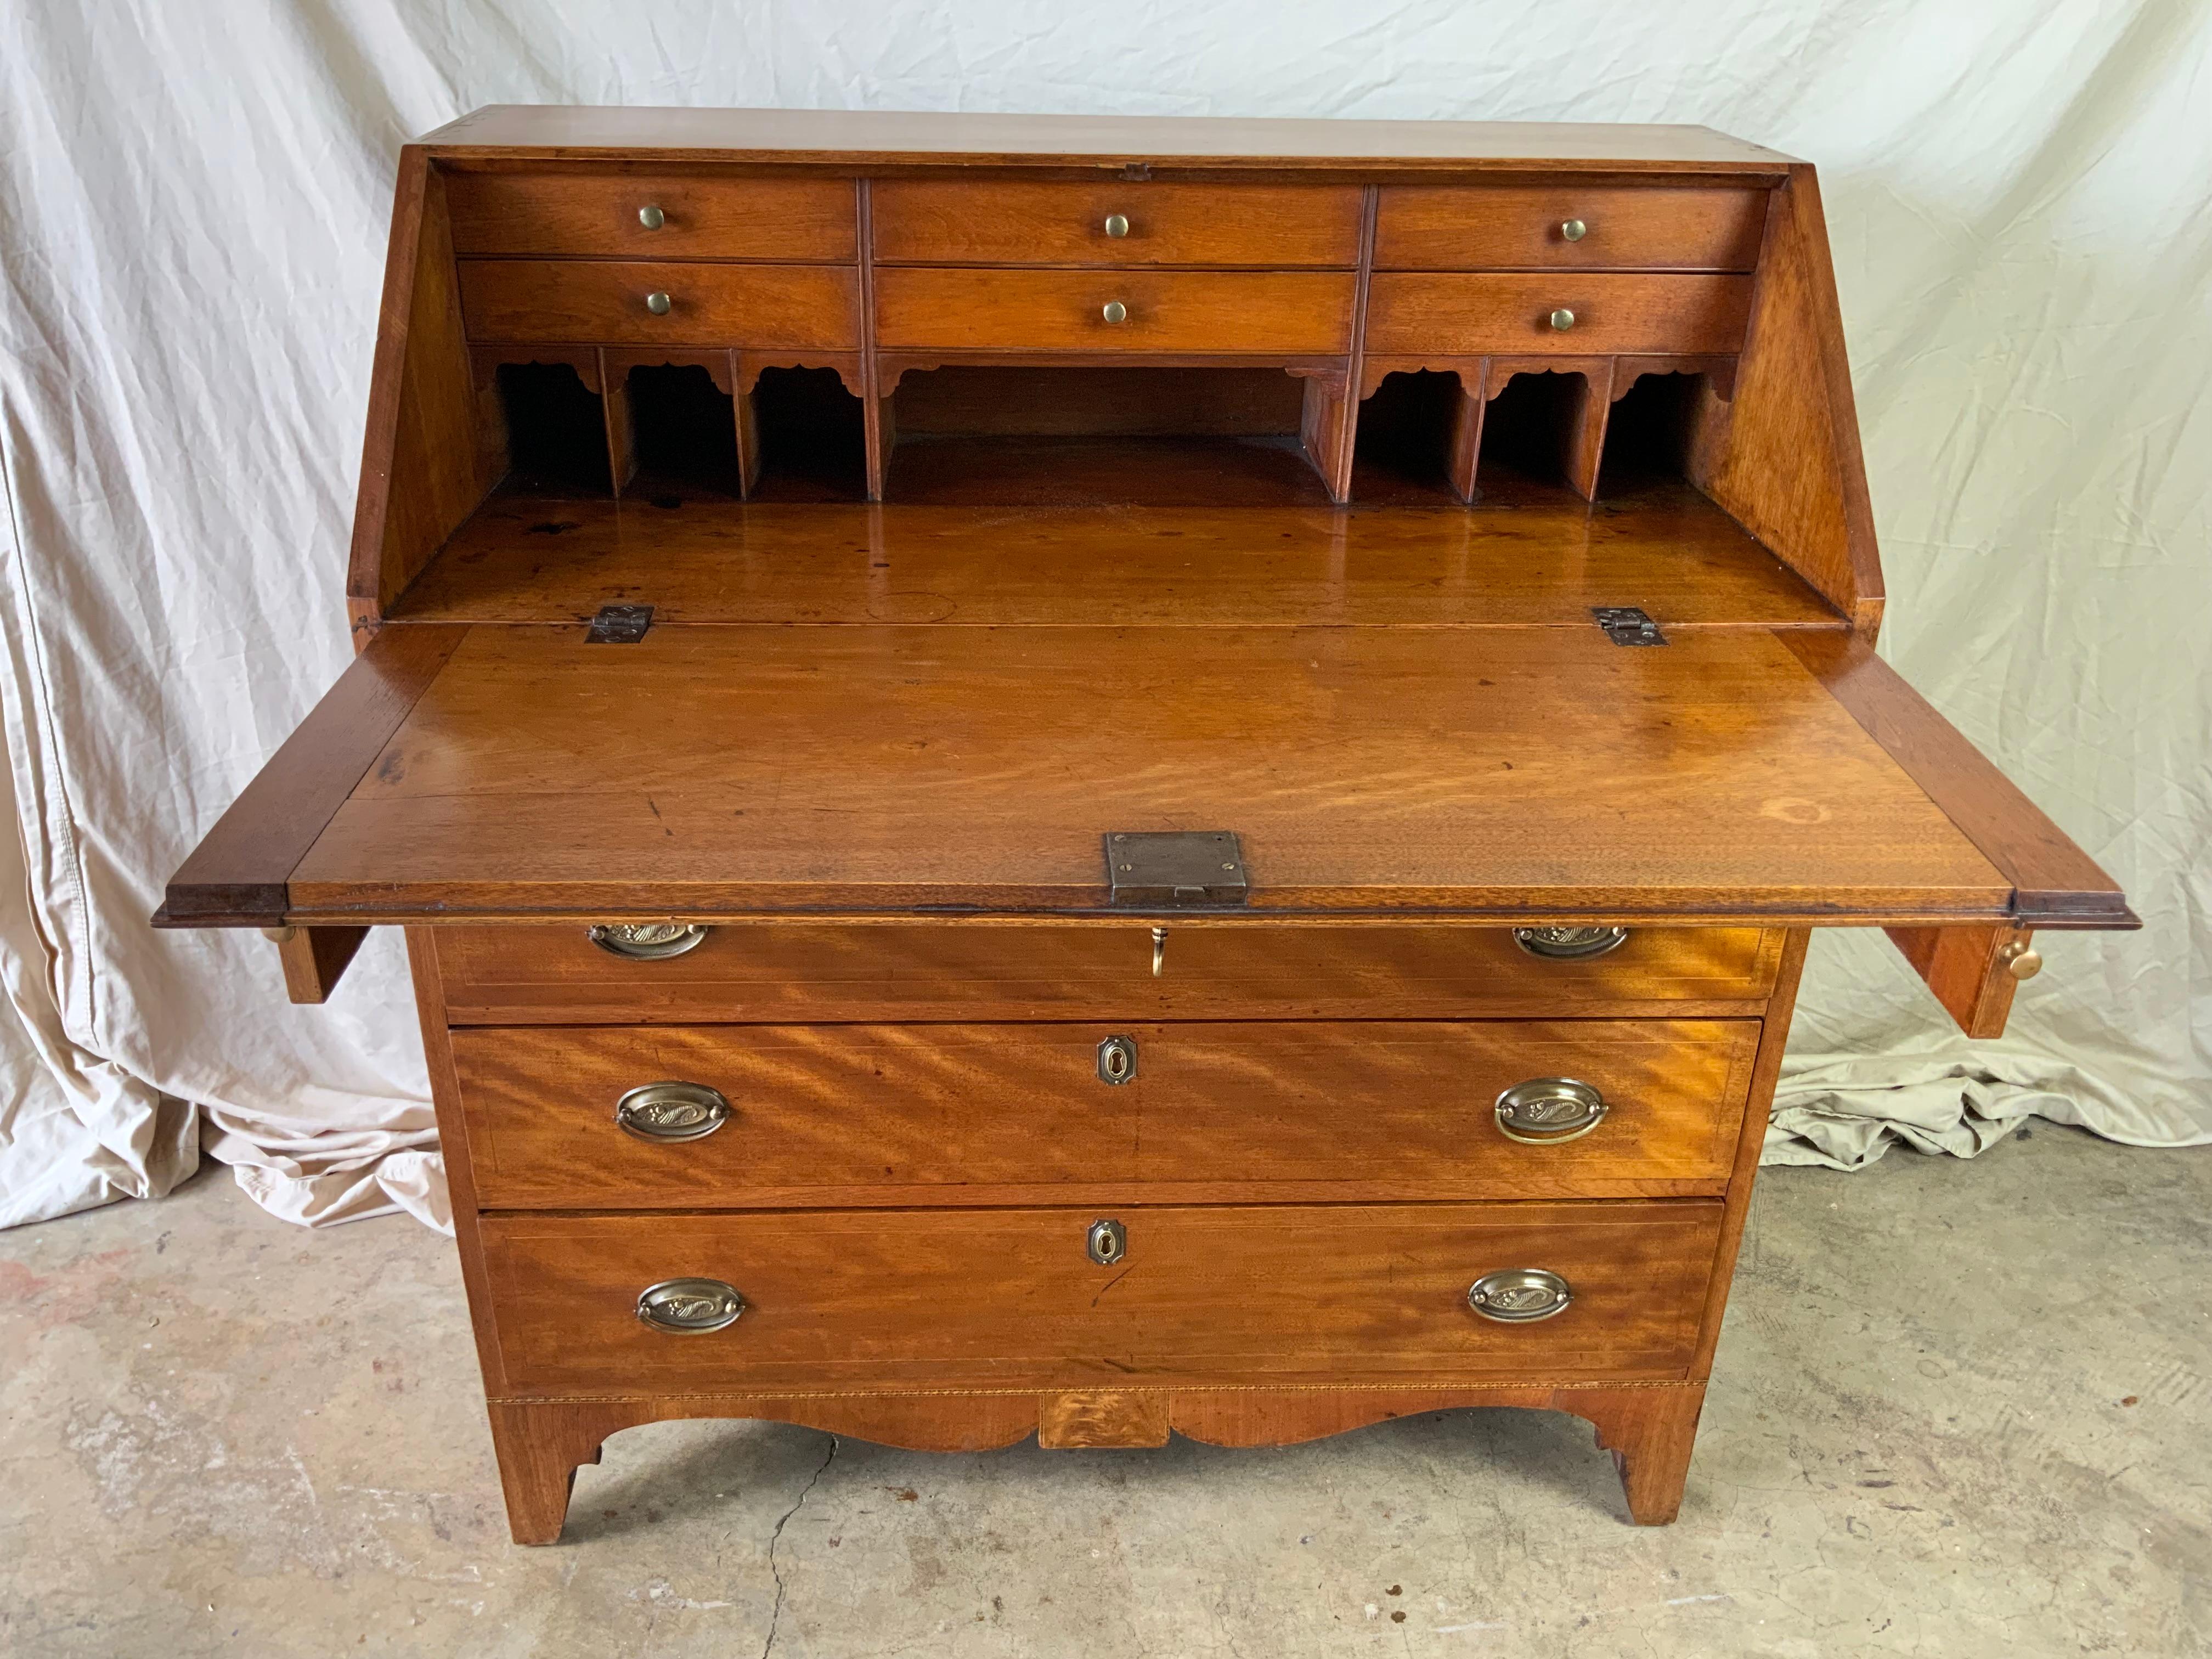 A very nice early 19th century Federal Birch New England Slant Lid Desk likely New Hampshire in origin around 1800-1830. Made of solid Birch with four large graduated inlaid drawers and a nicely proportioned interior pigeon hole area with six